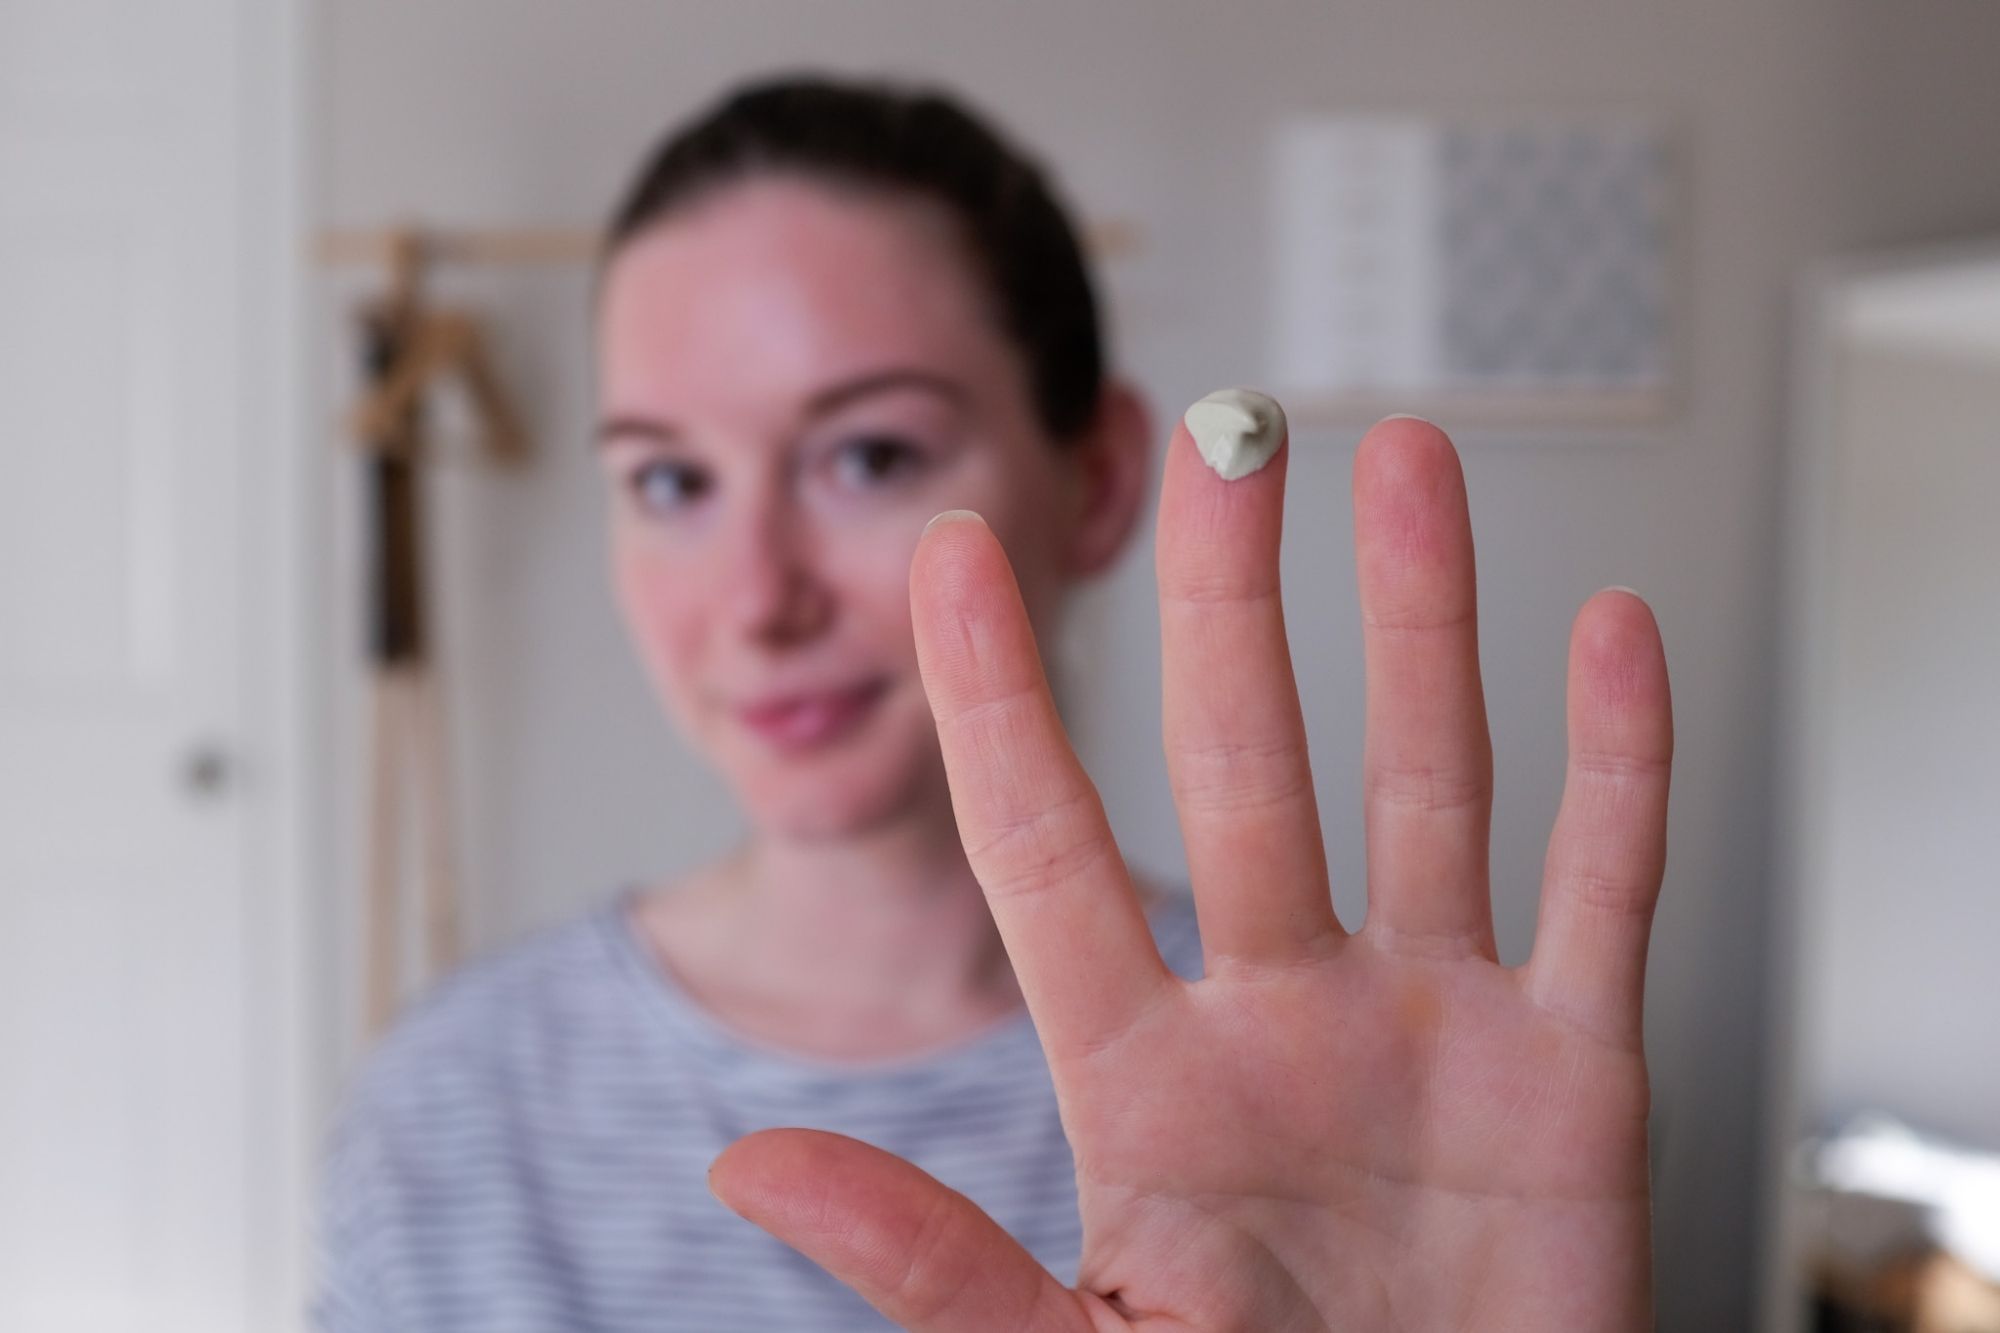 Alyssa holds her hand up to the camera; on one finger is a dime-sized amount of product